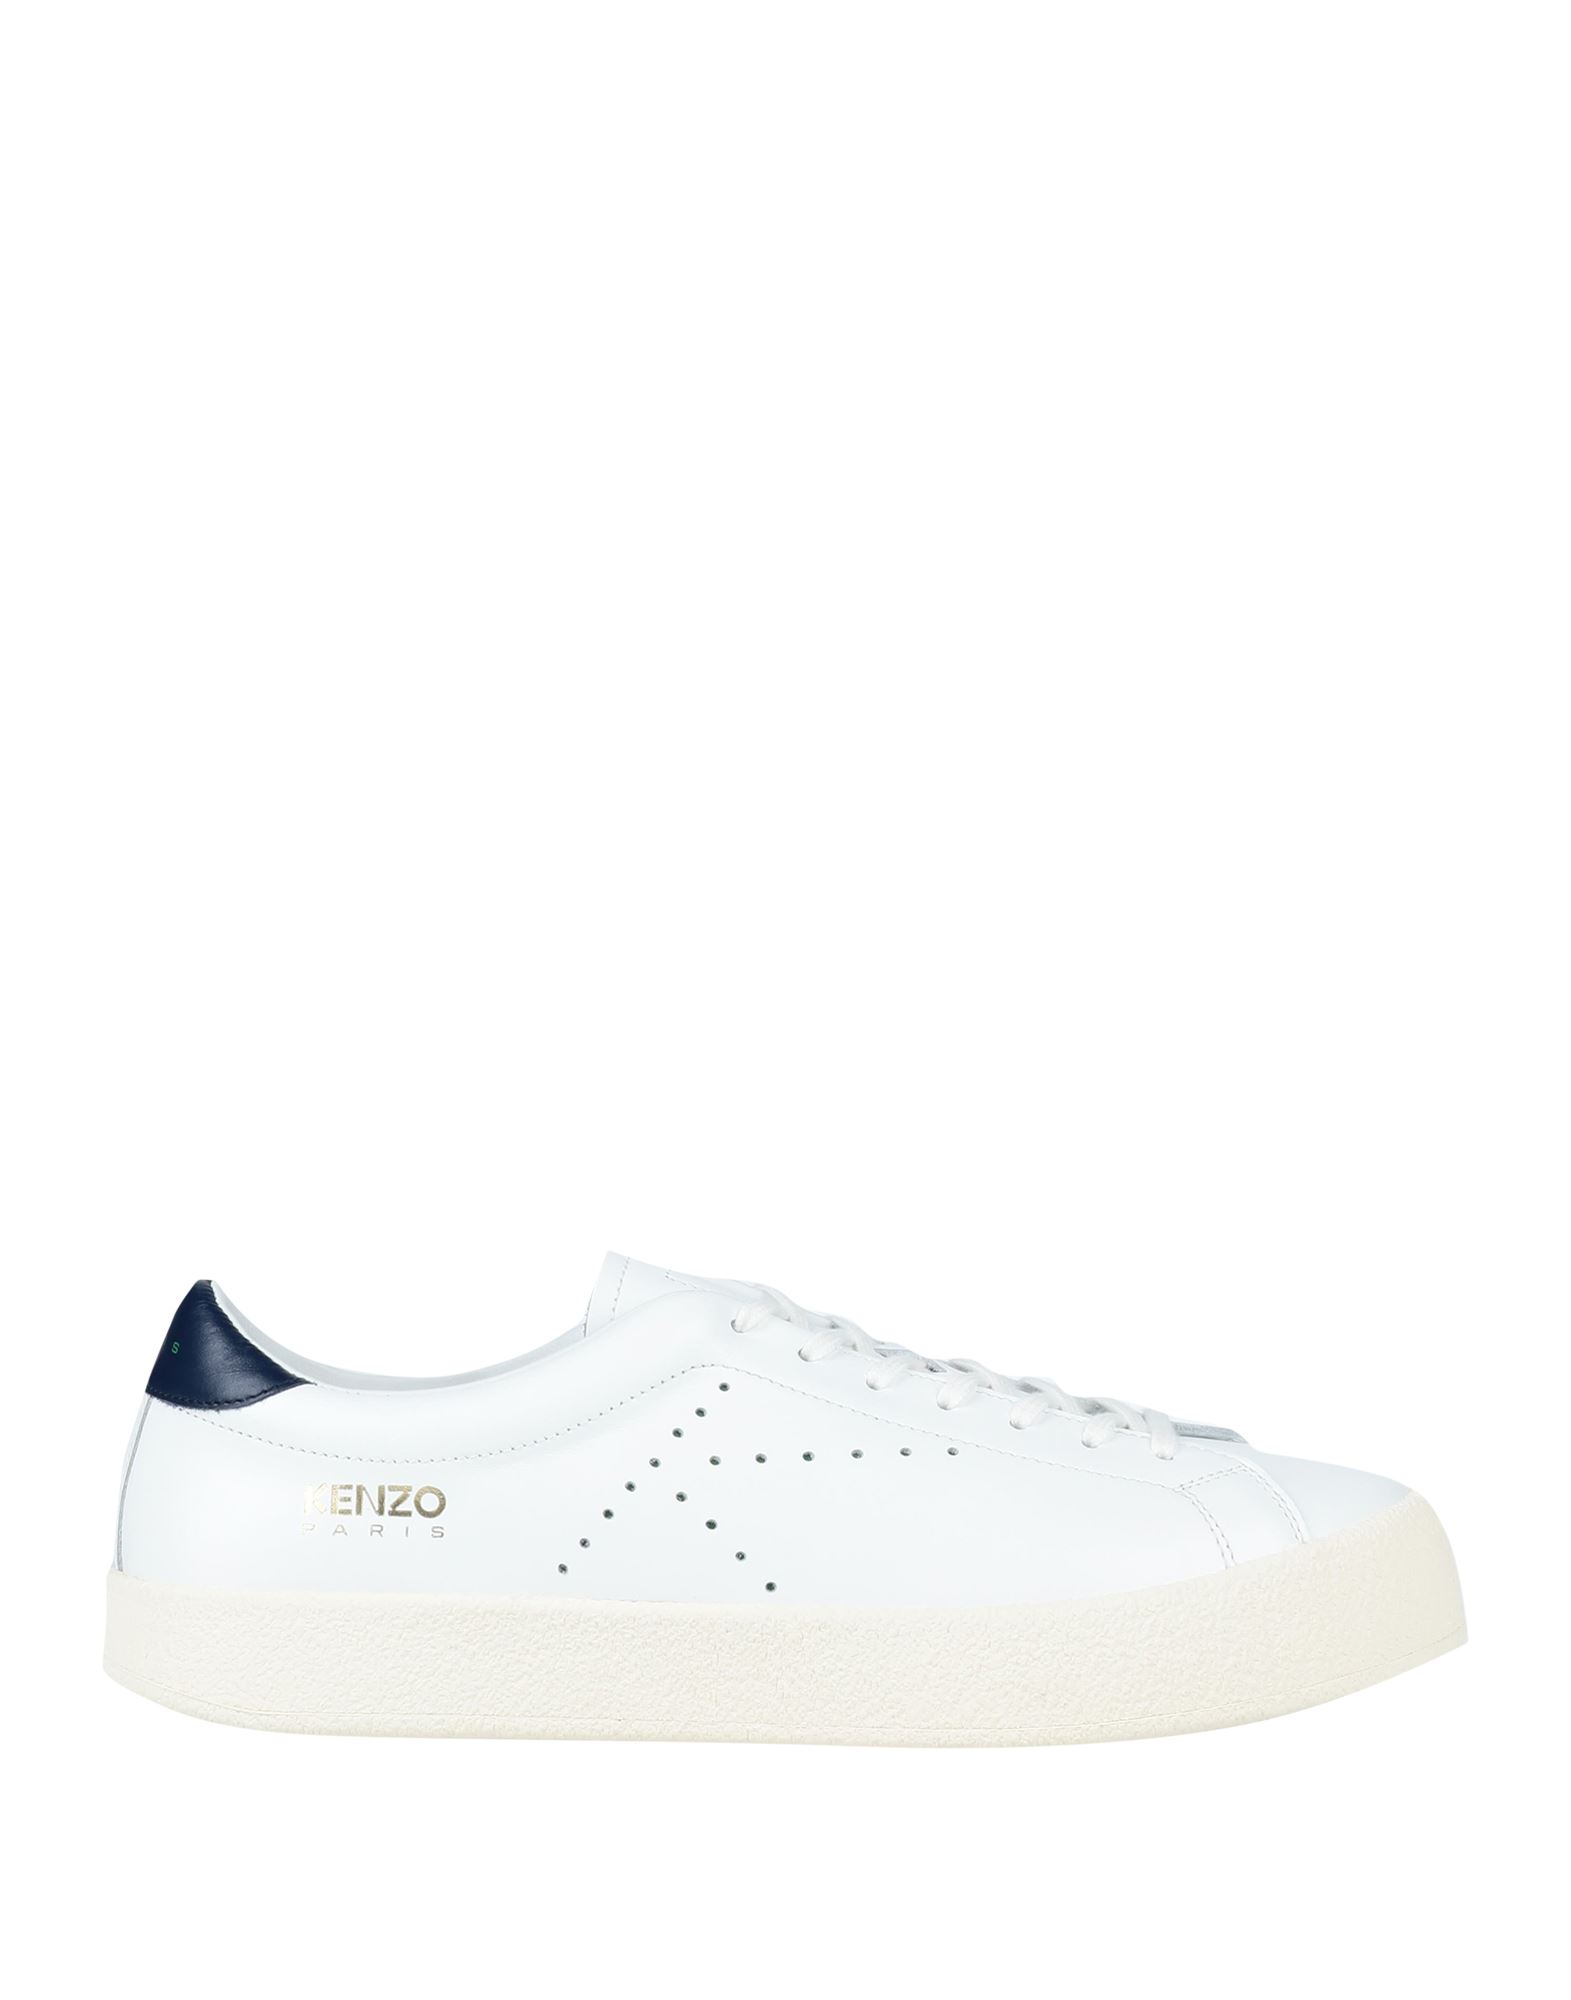 Shop Kenzo Man Sneakers White Size 8.5 Soft Leather